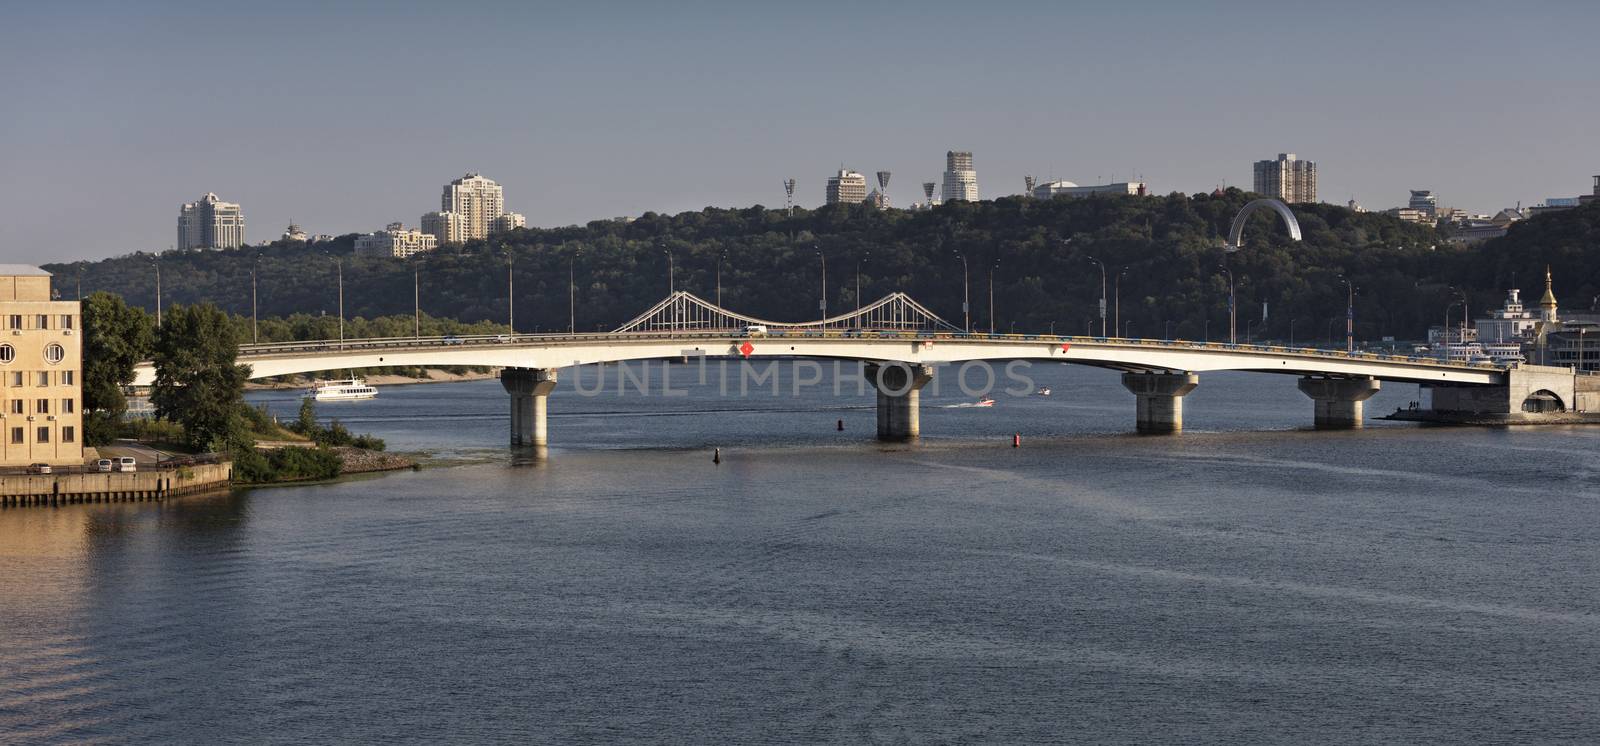 View of the Havana Bridge across the Dnipro River in Kiev in the rays of the evening sunset